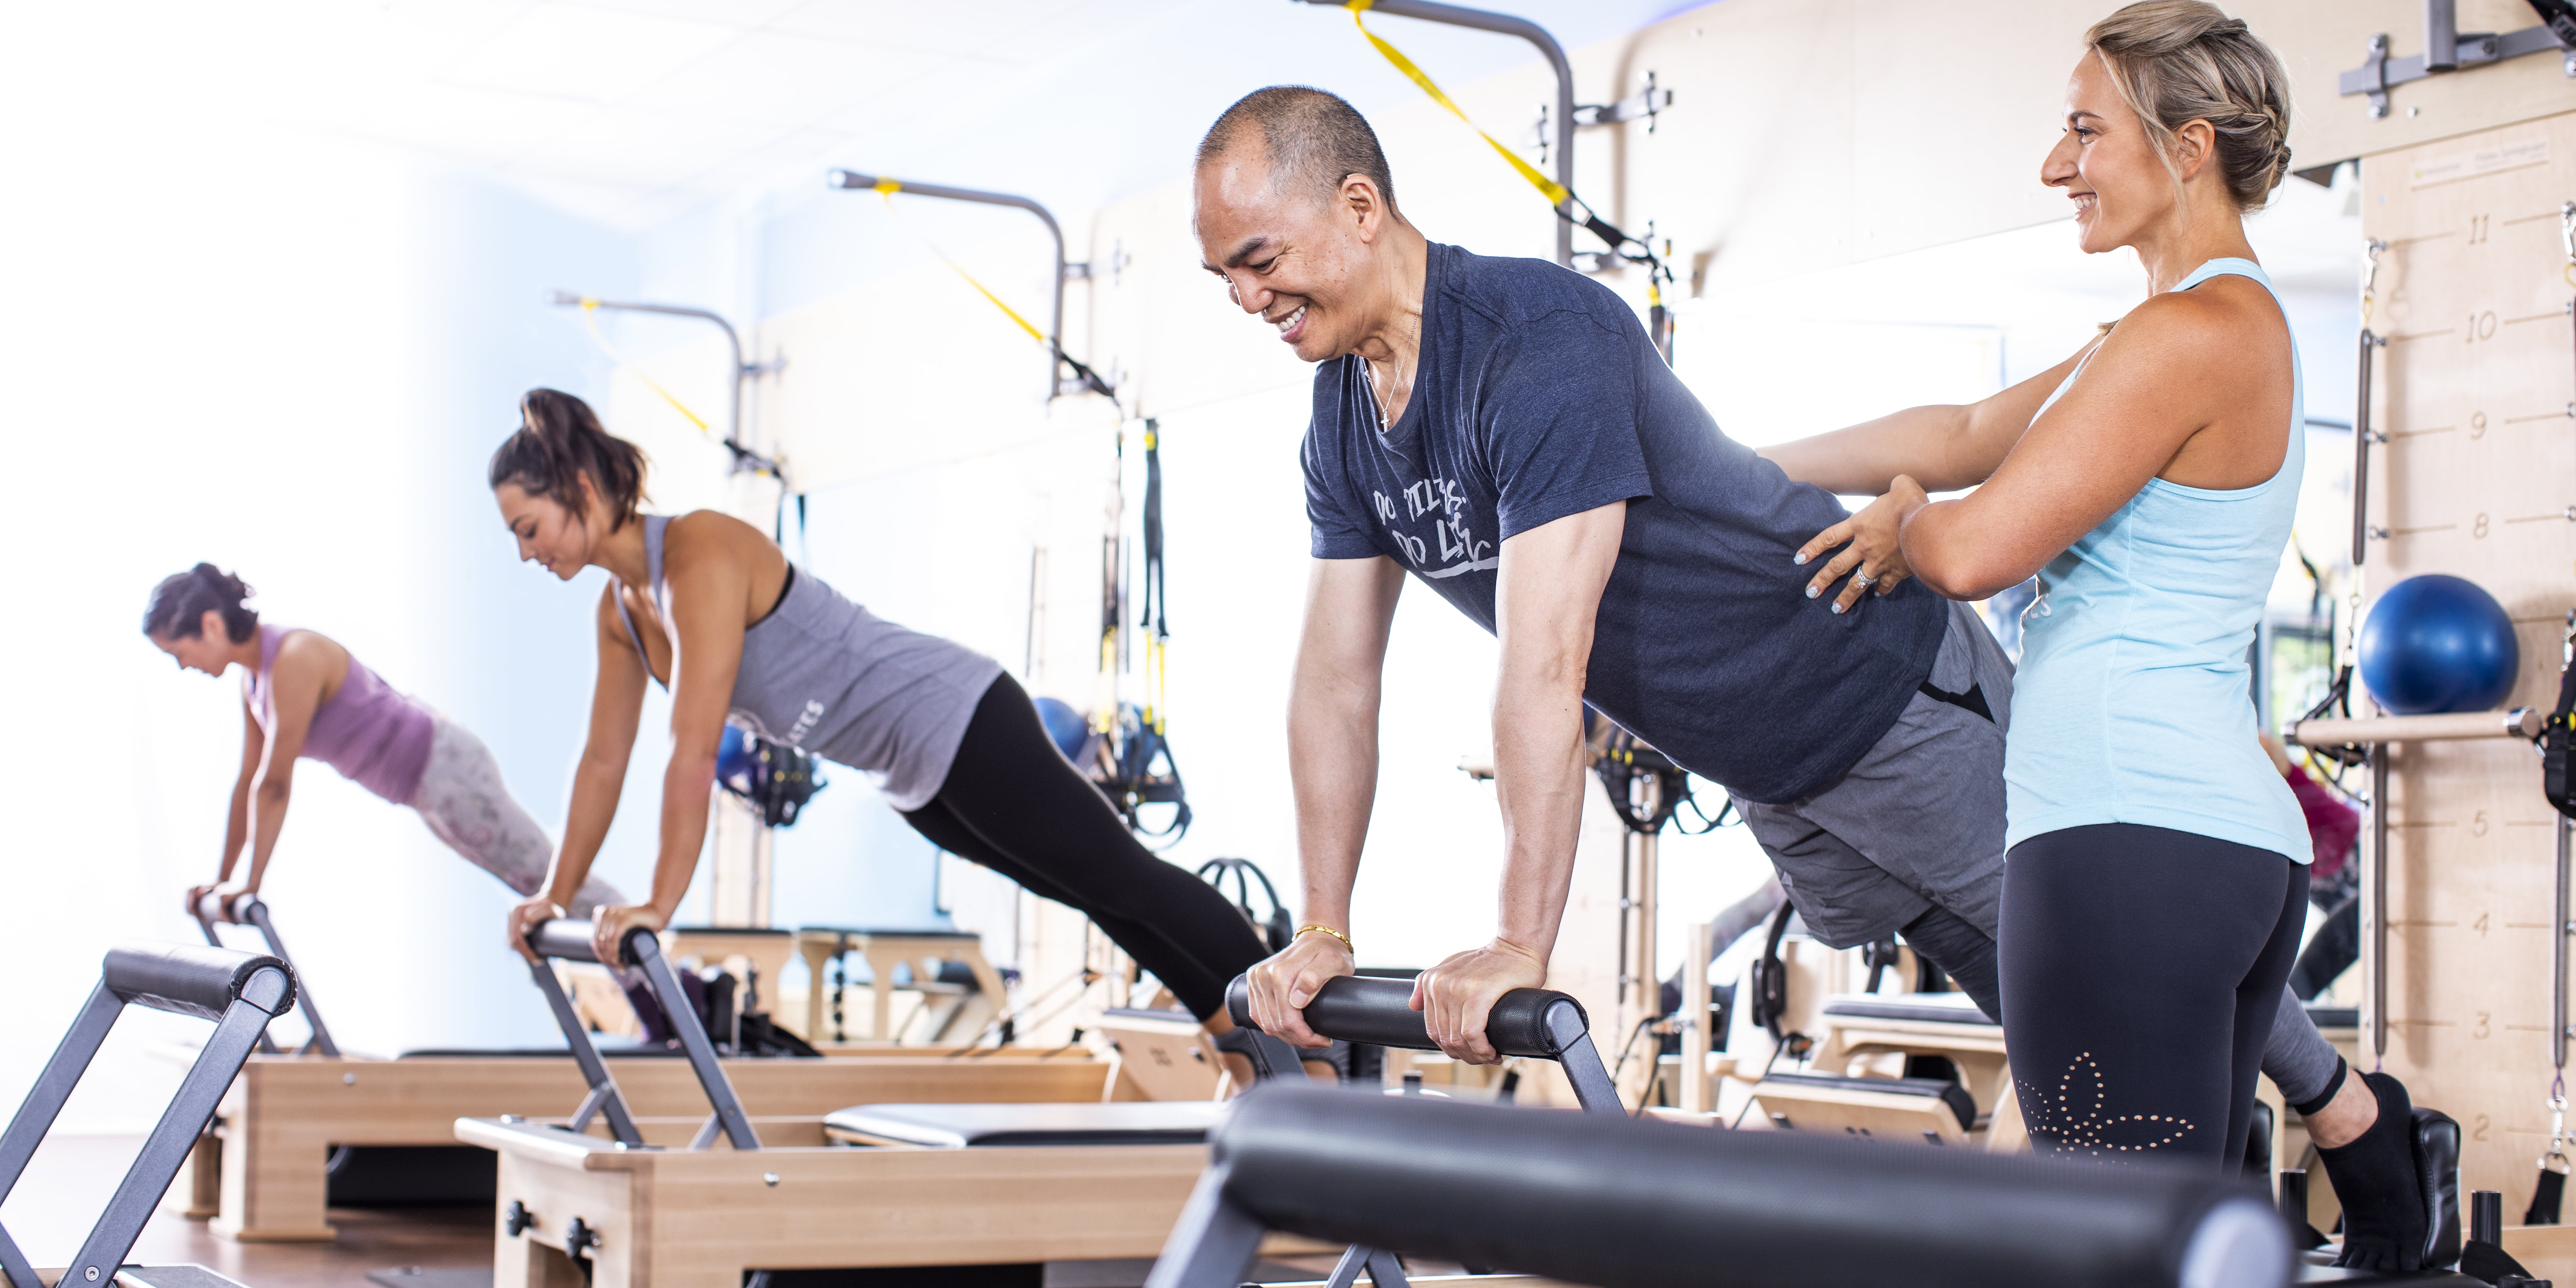 Club Pilates Prices: How Much Does a Membership Cost